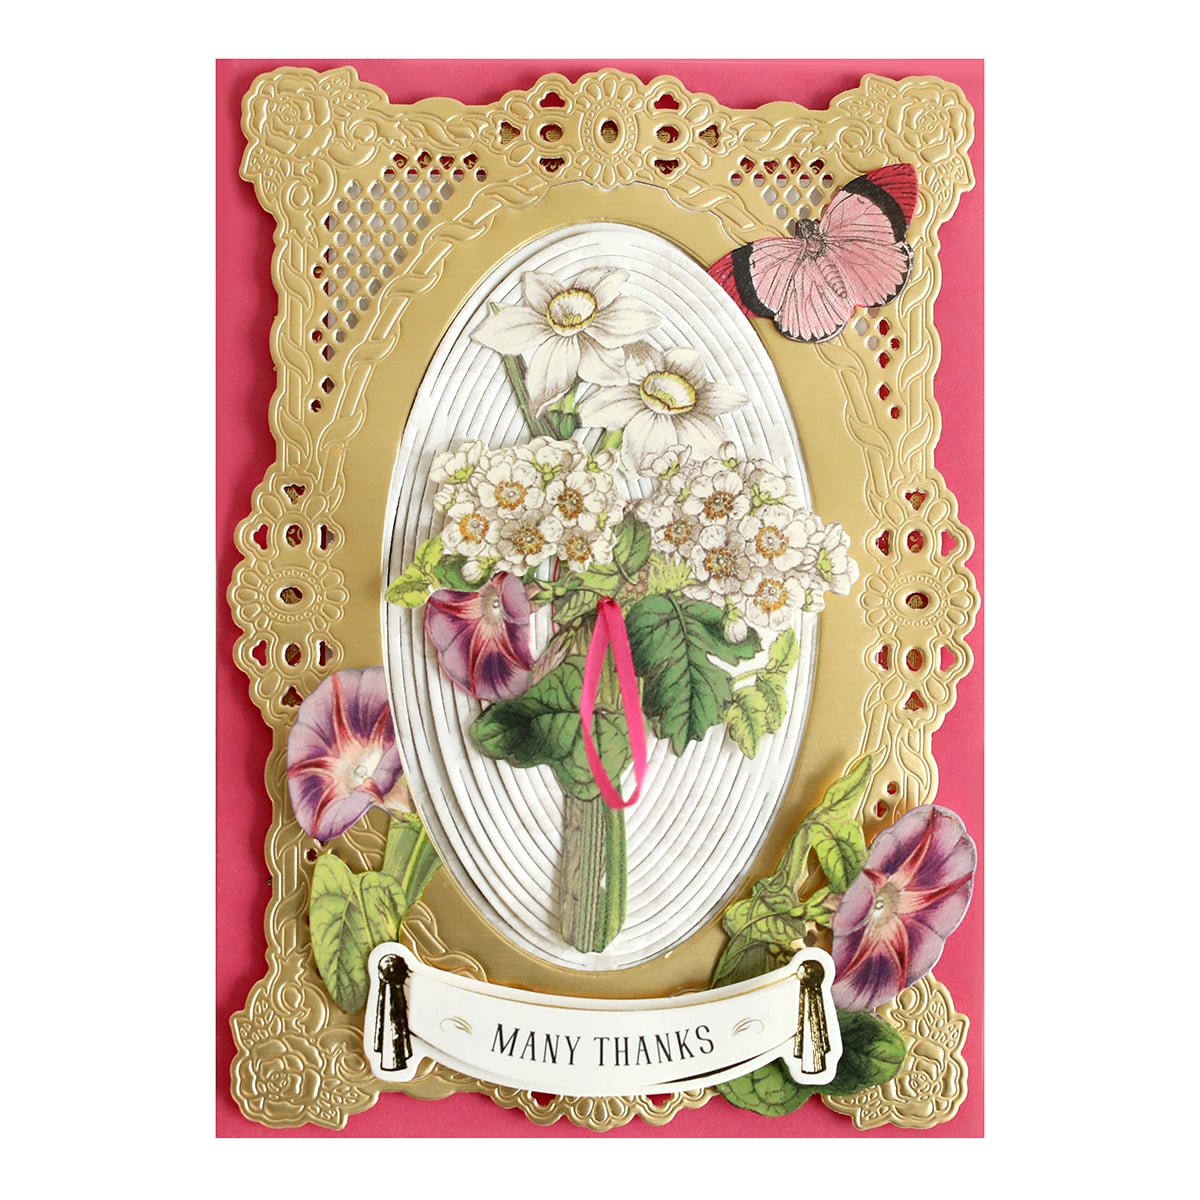 a card with a vase of flowers on it.